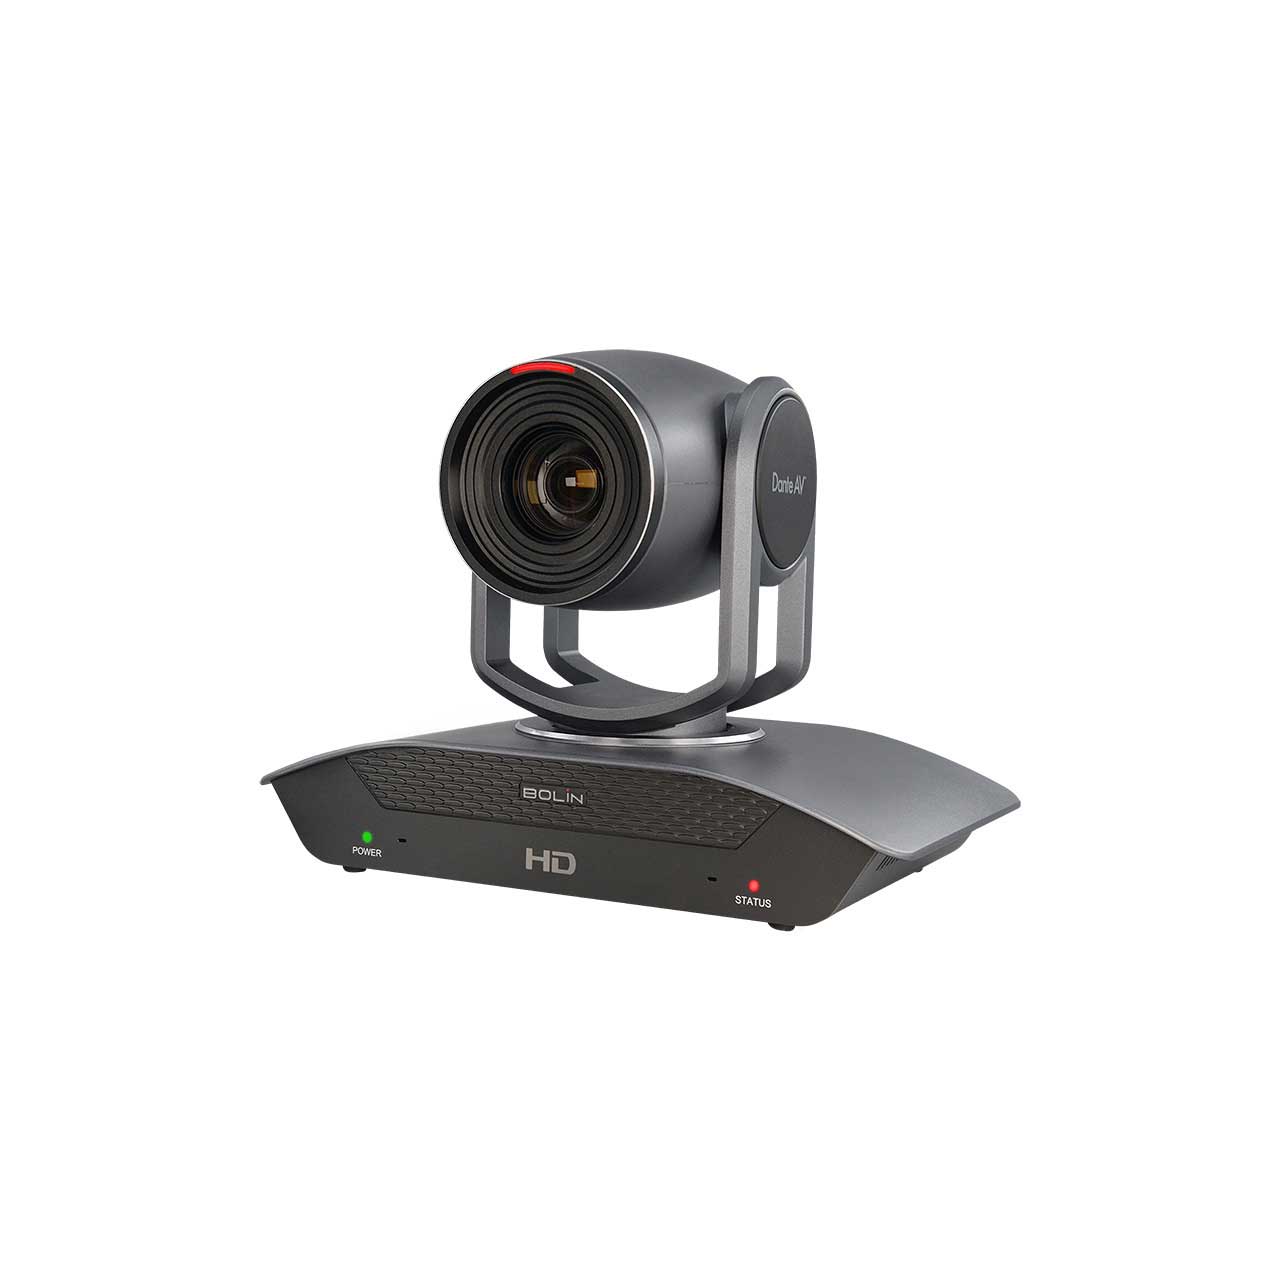  Logitech PTZ PRO 2 Video Camera for Conference Rooms